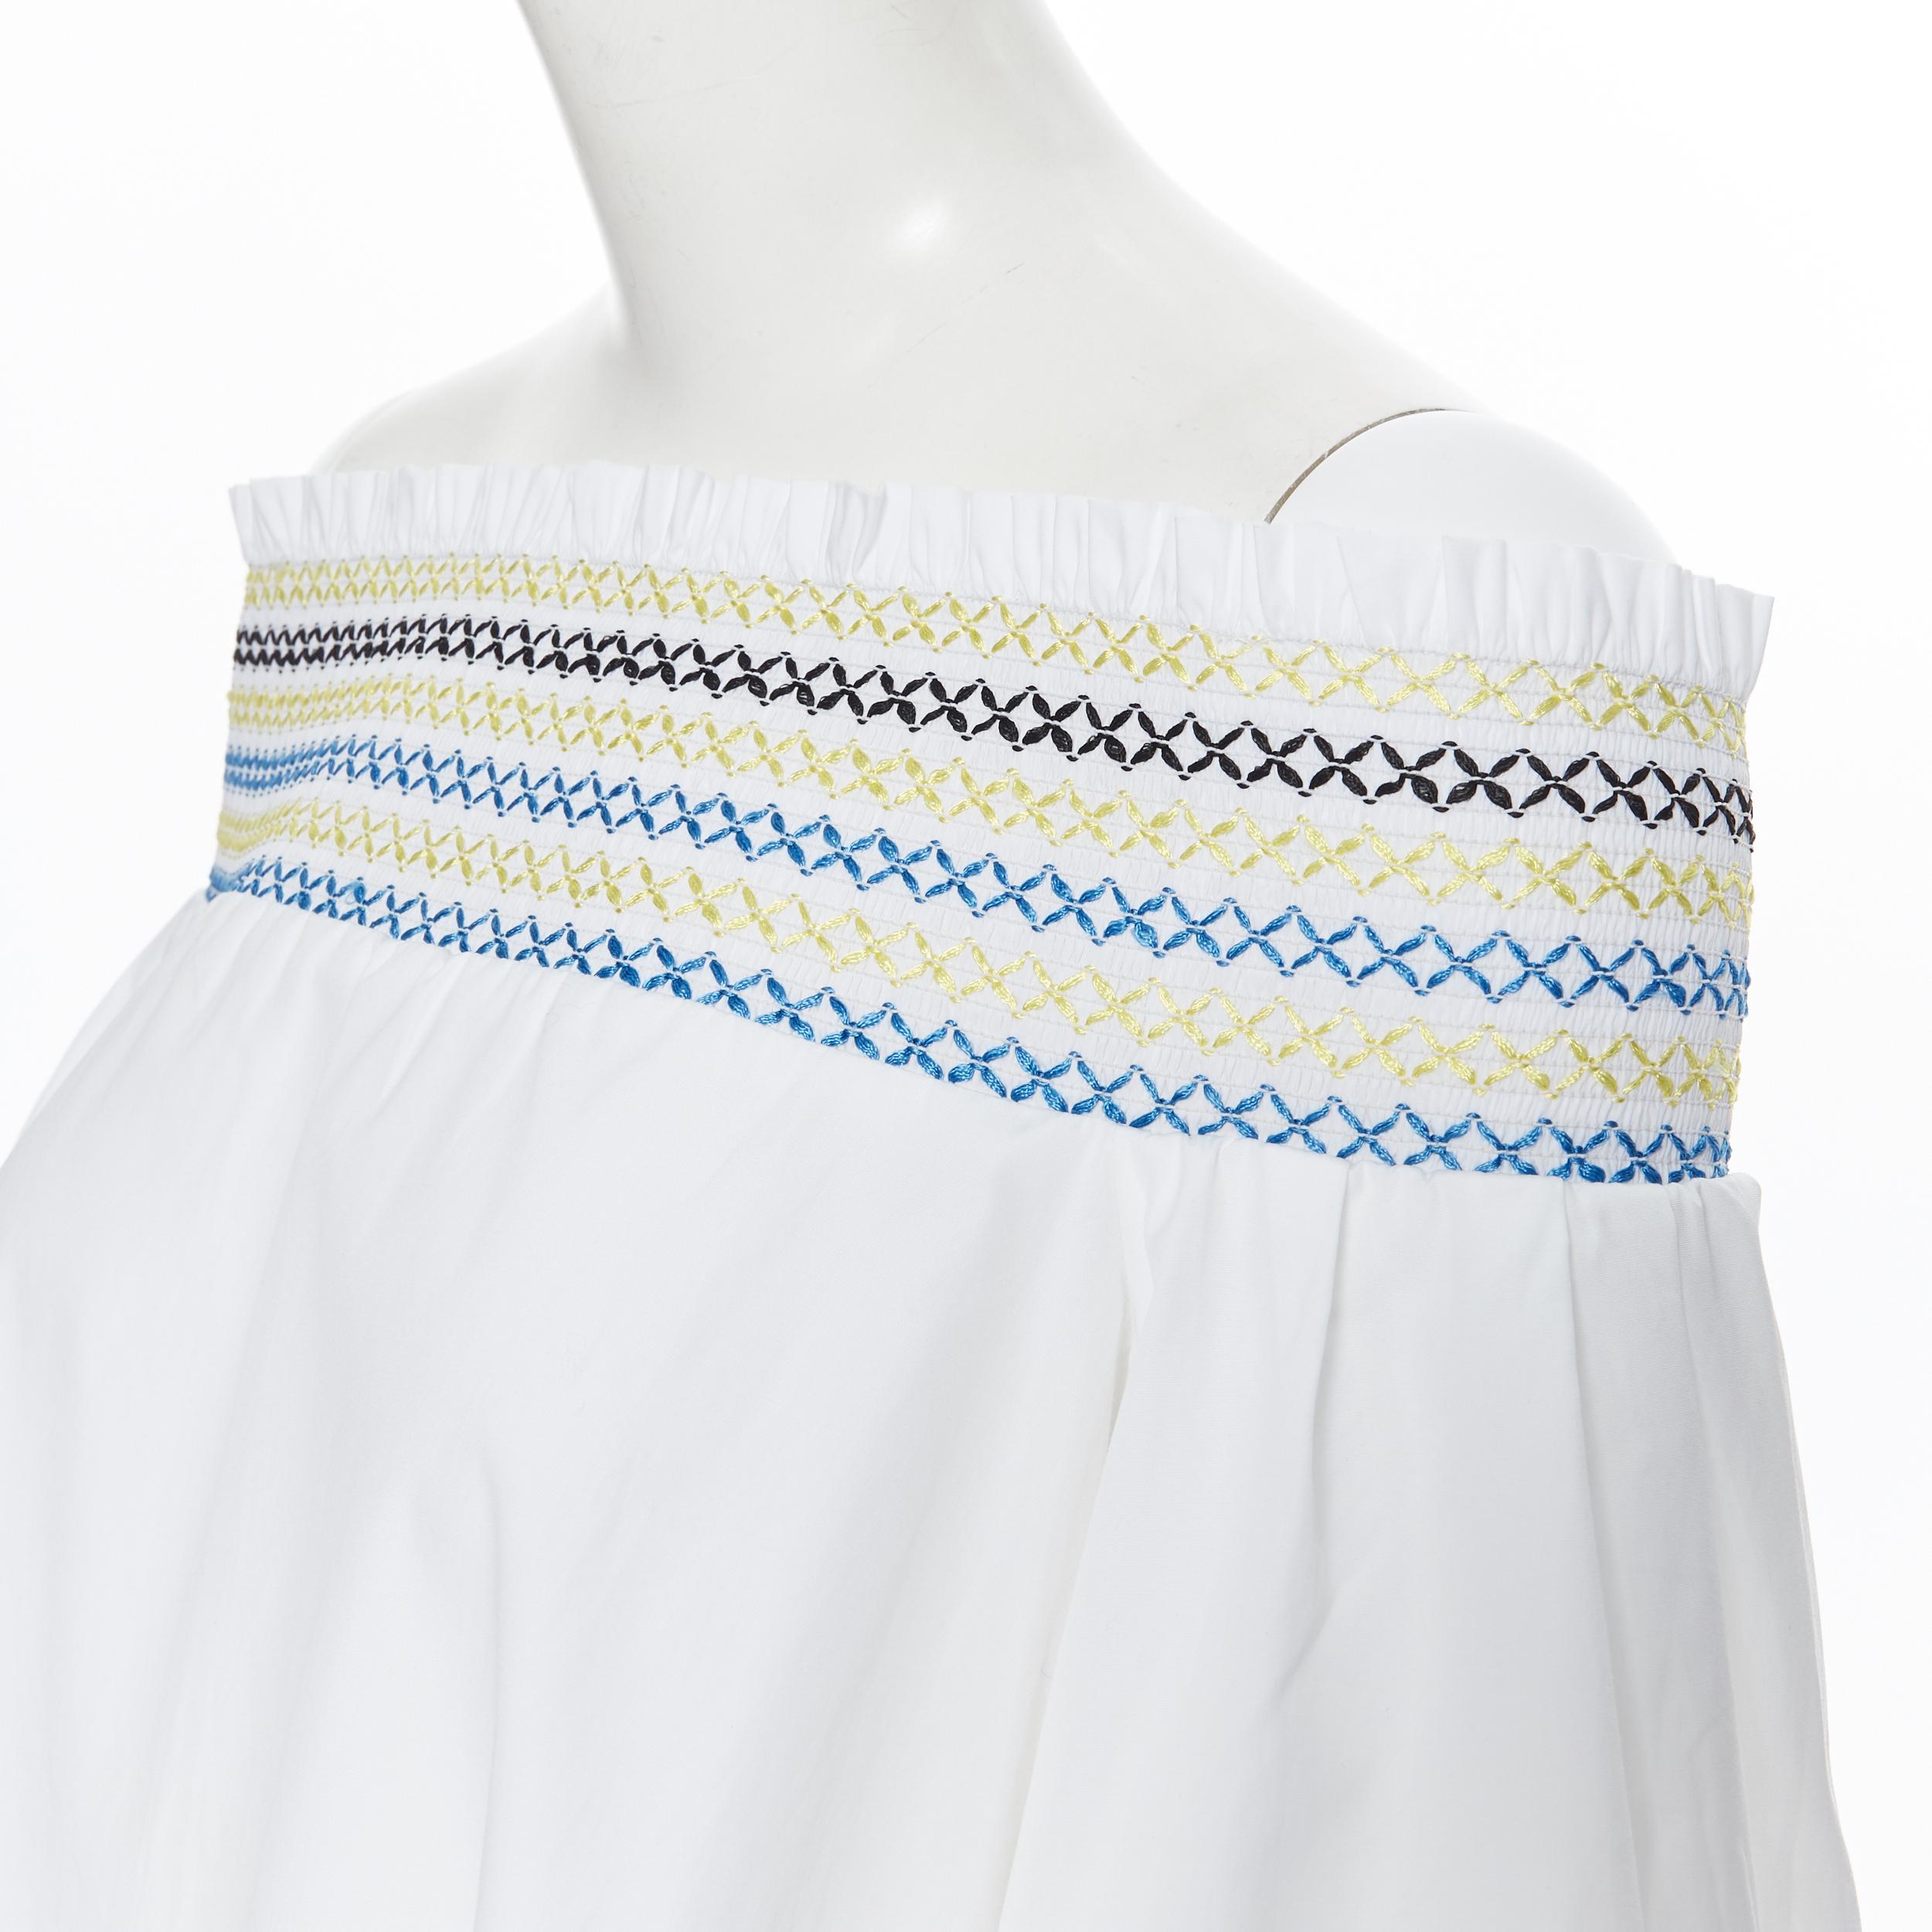 PETER PILOTTO white cotton ethnic embroidery off shoulder puff sleeve top UK6
Brand: Peter Pilotto
Designer: Peter Pilotto
Model Name / Style: Off shoulder top
Material: Cotton
Color: White
Pattern: Solid
Extra Detail: 100% cotton. Yellow, blue and